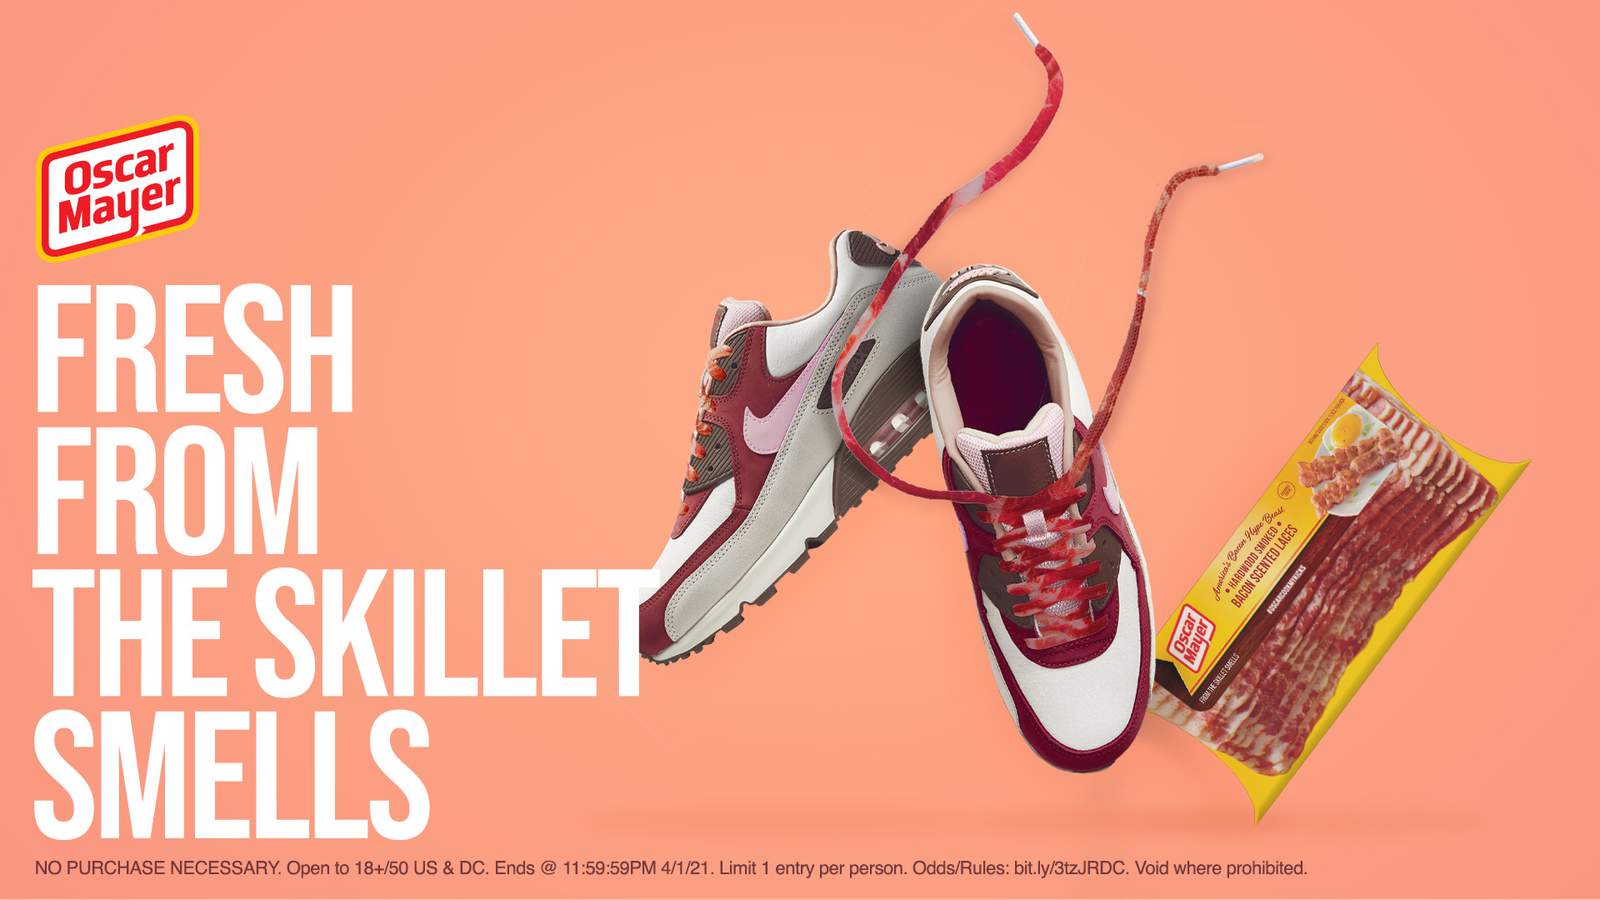 Oscar Mayer offering free shoelaces that smell like bacon